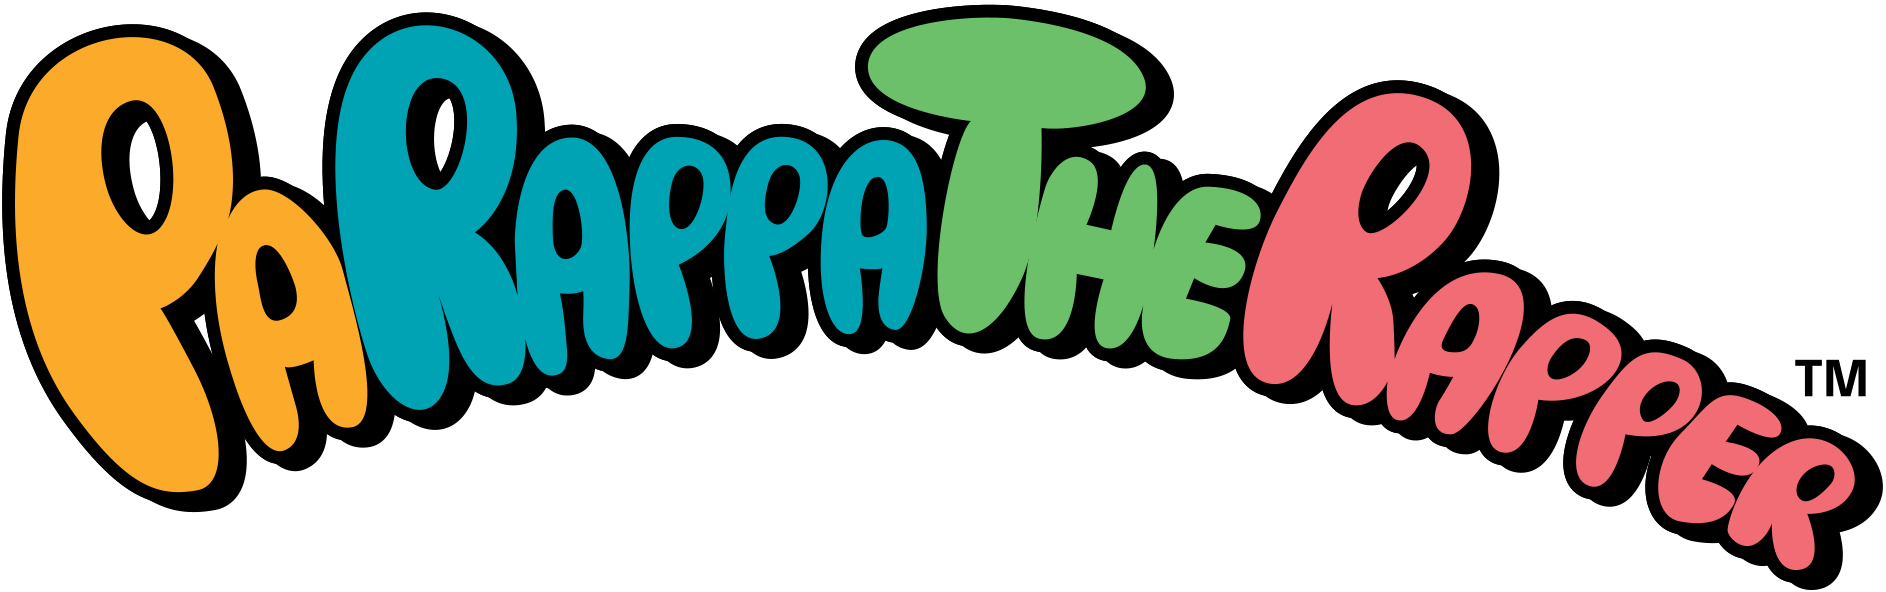 Parappa the Rapper is being remastered for PS4